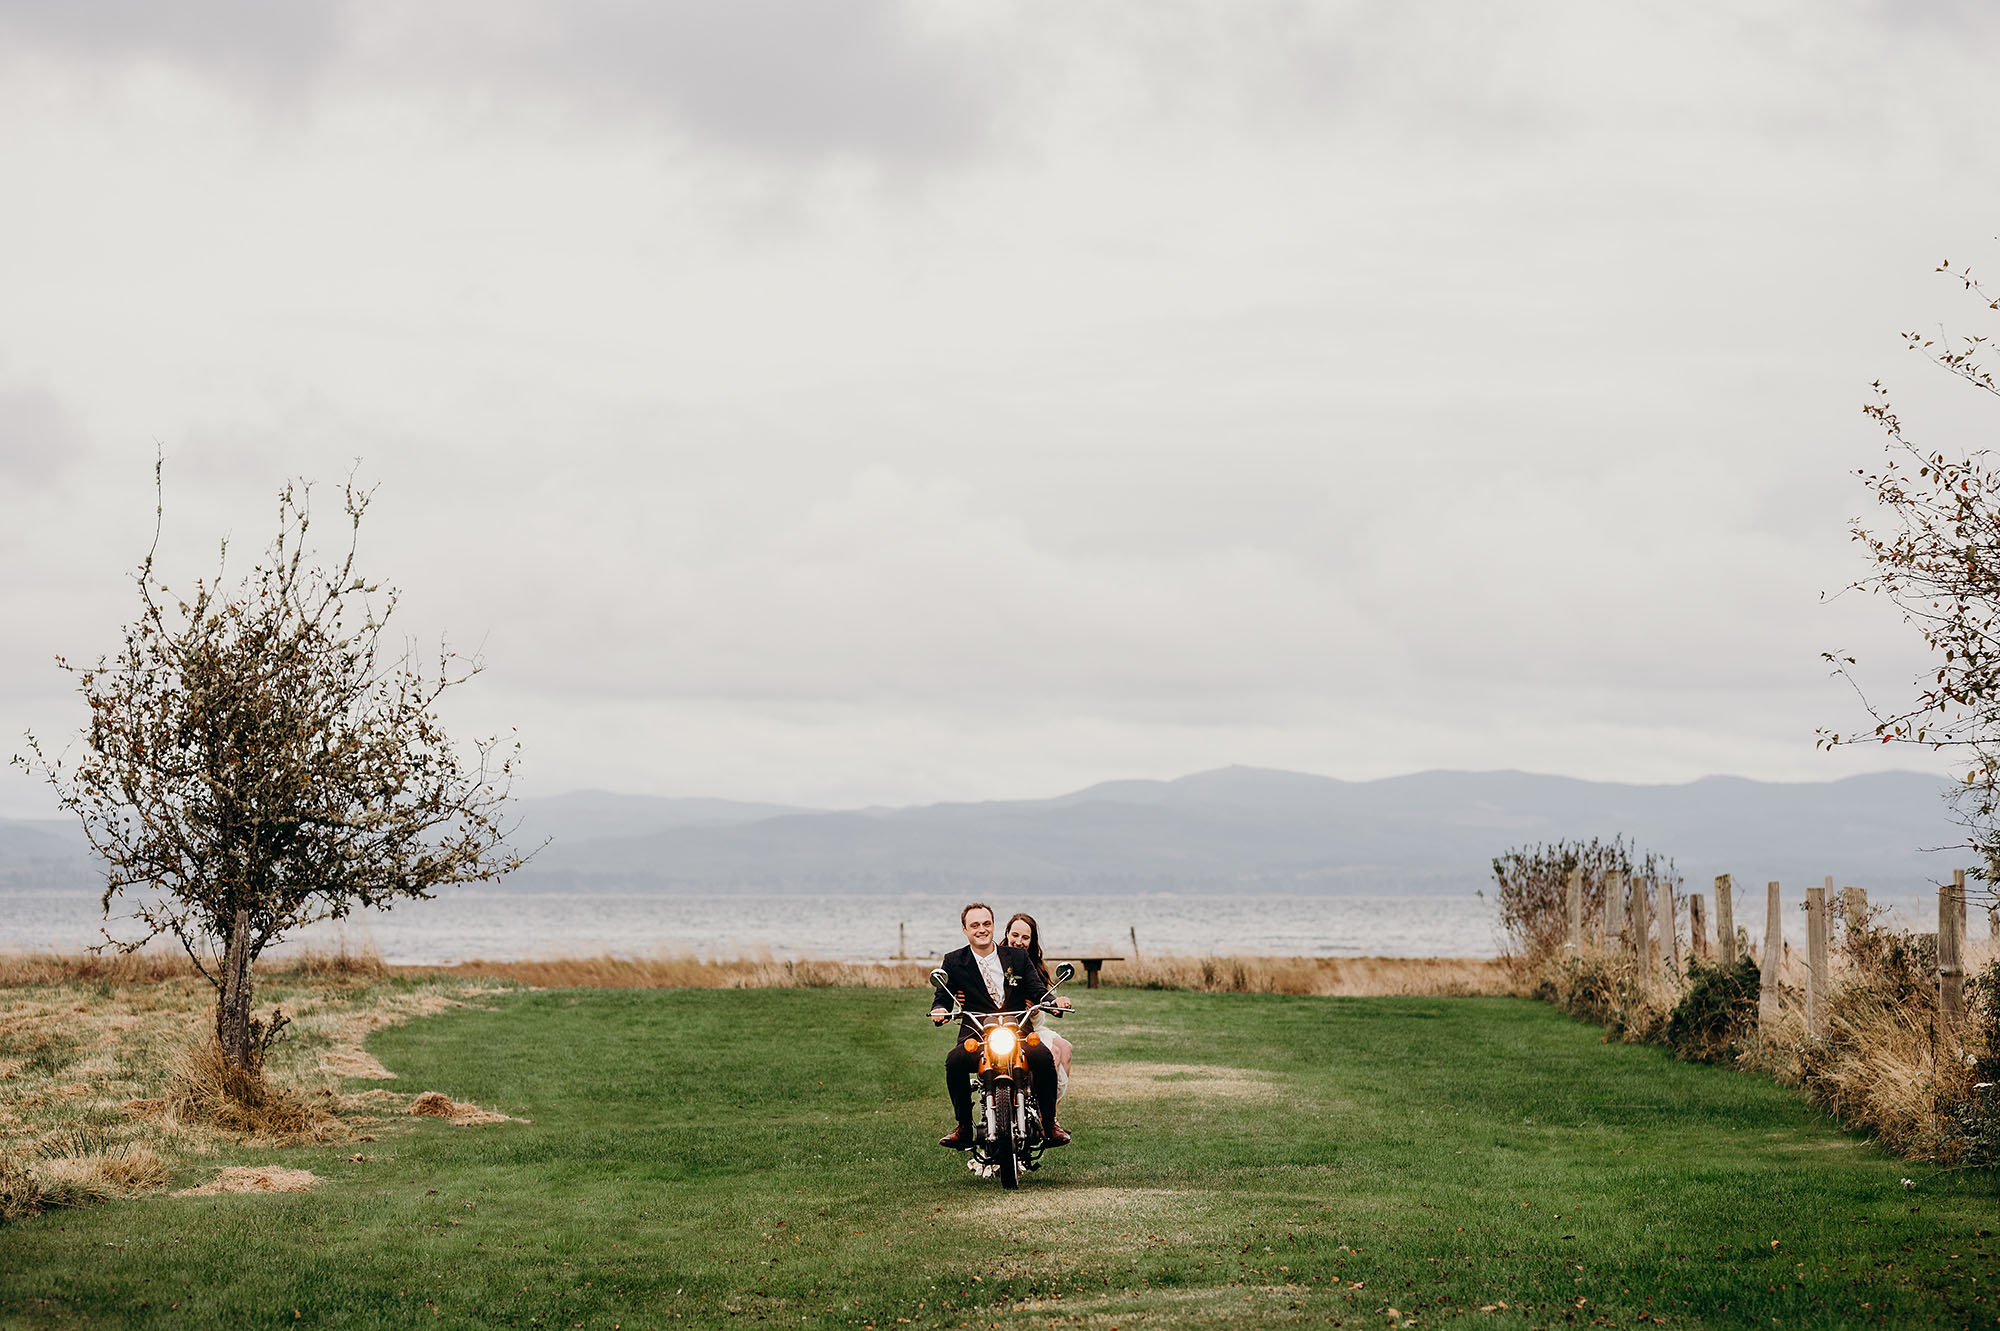 Long Beach Peninsula Wedding Bride & Groom Riding Back on Motorcycle by Briana Morrison Photography